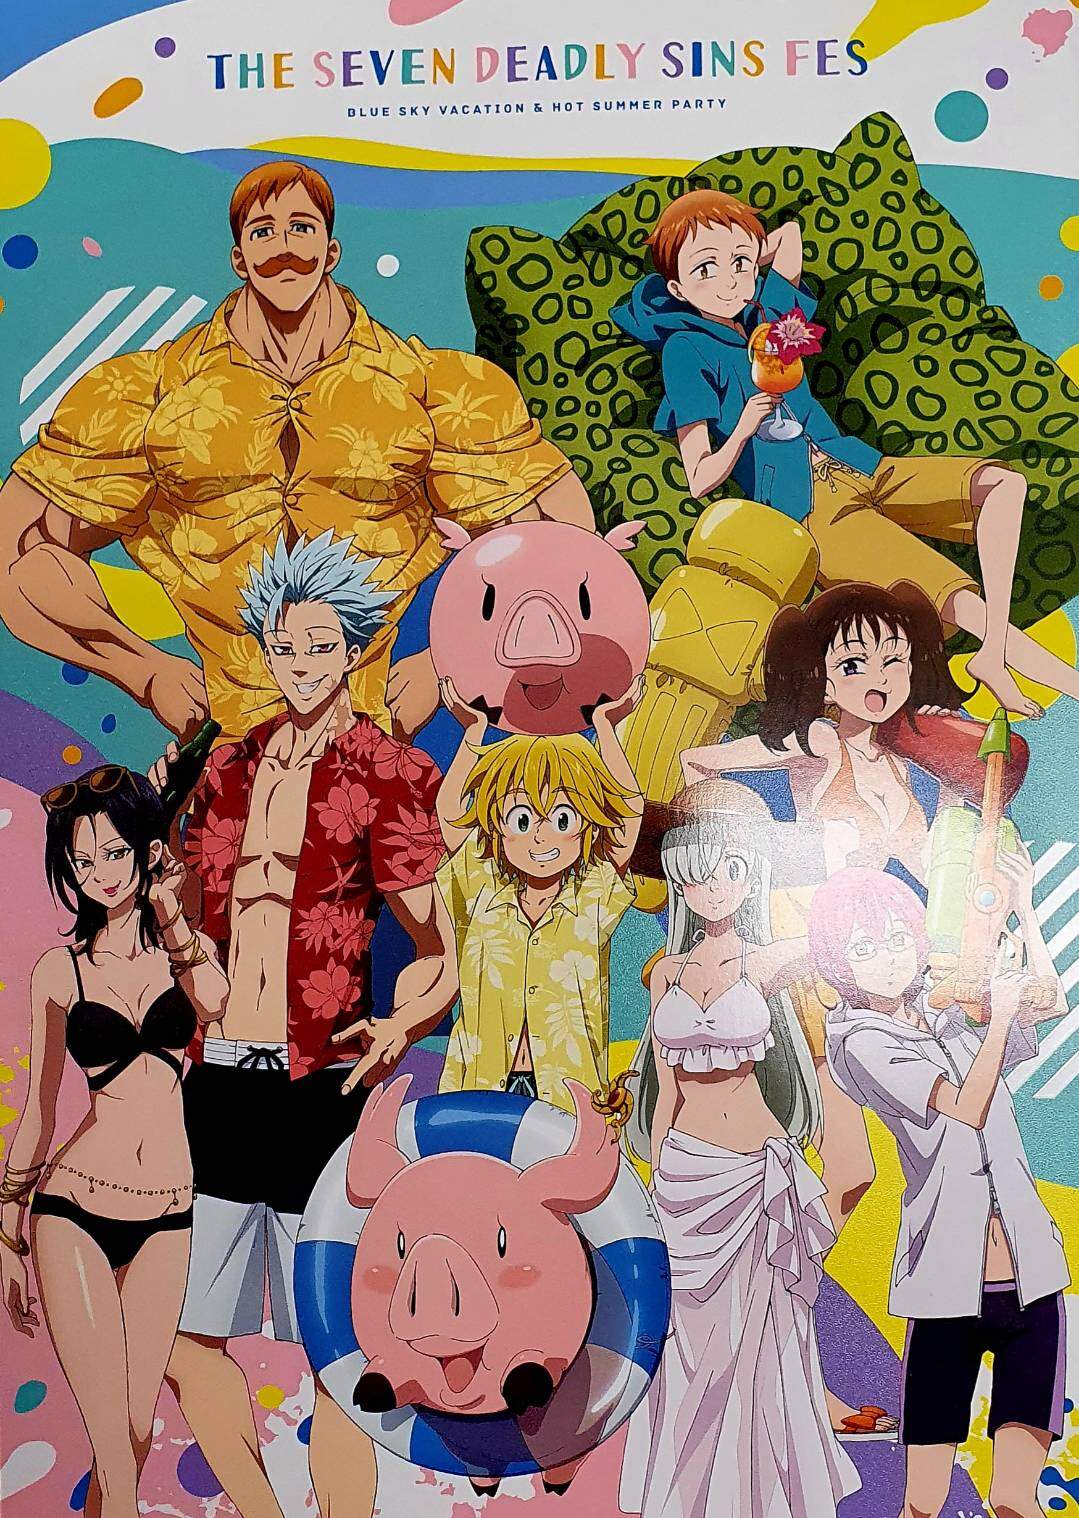 christian almonte recommends The Seven Deadly Sins Hot